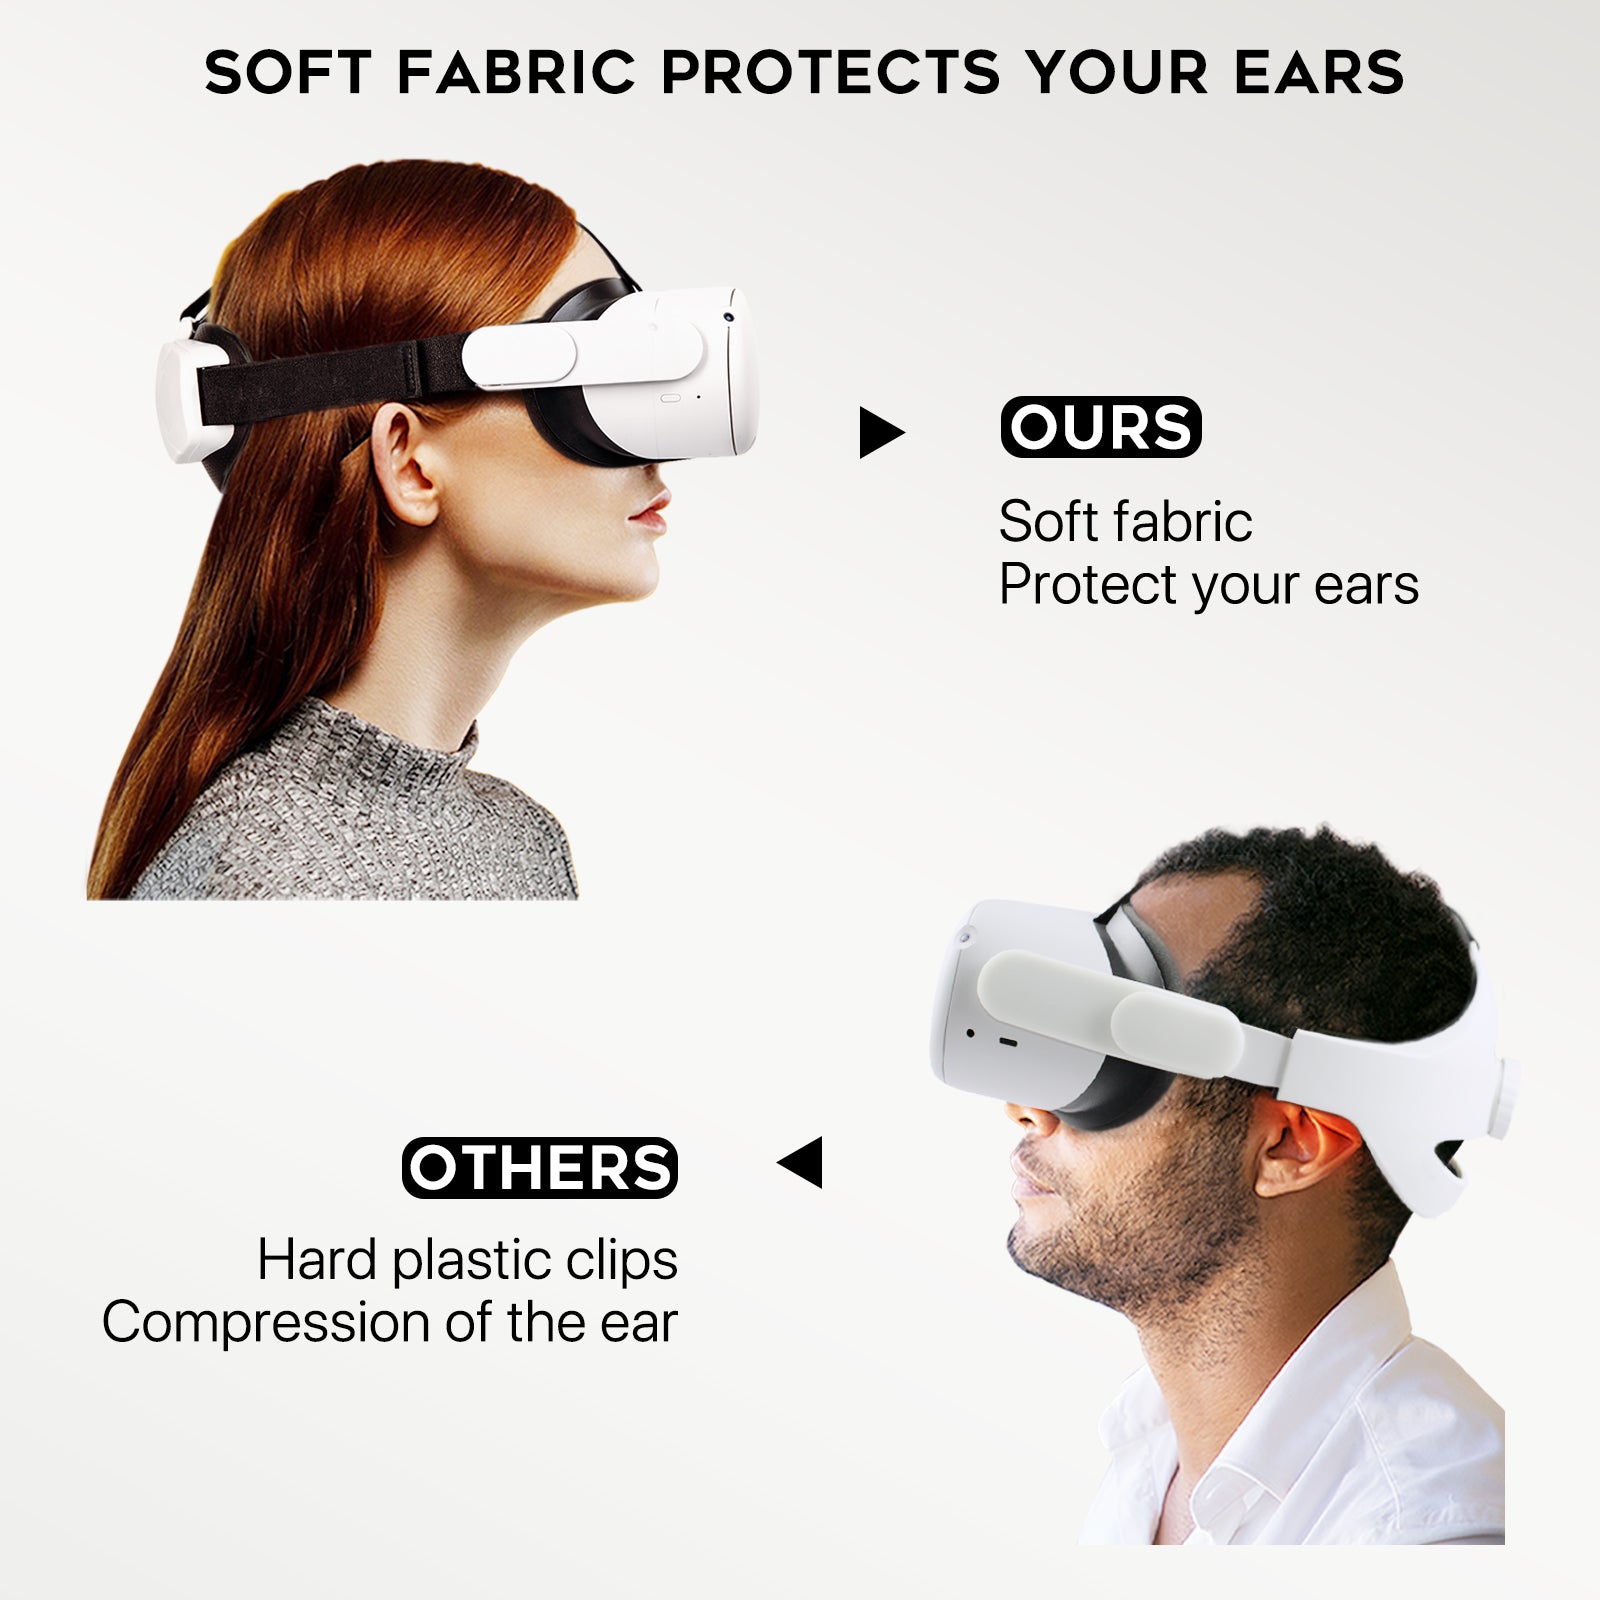 Soft Fabric Protects your ears